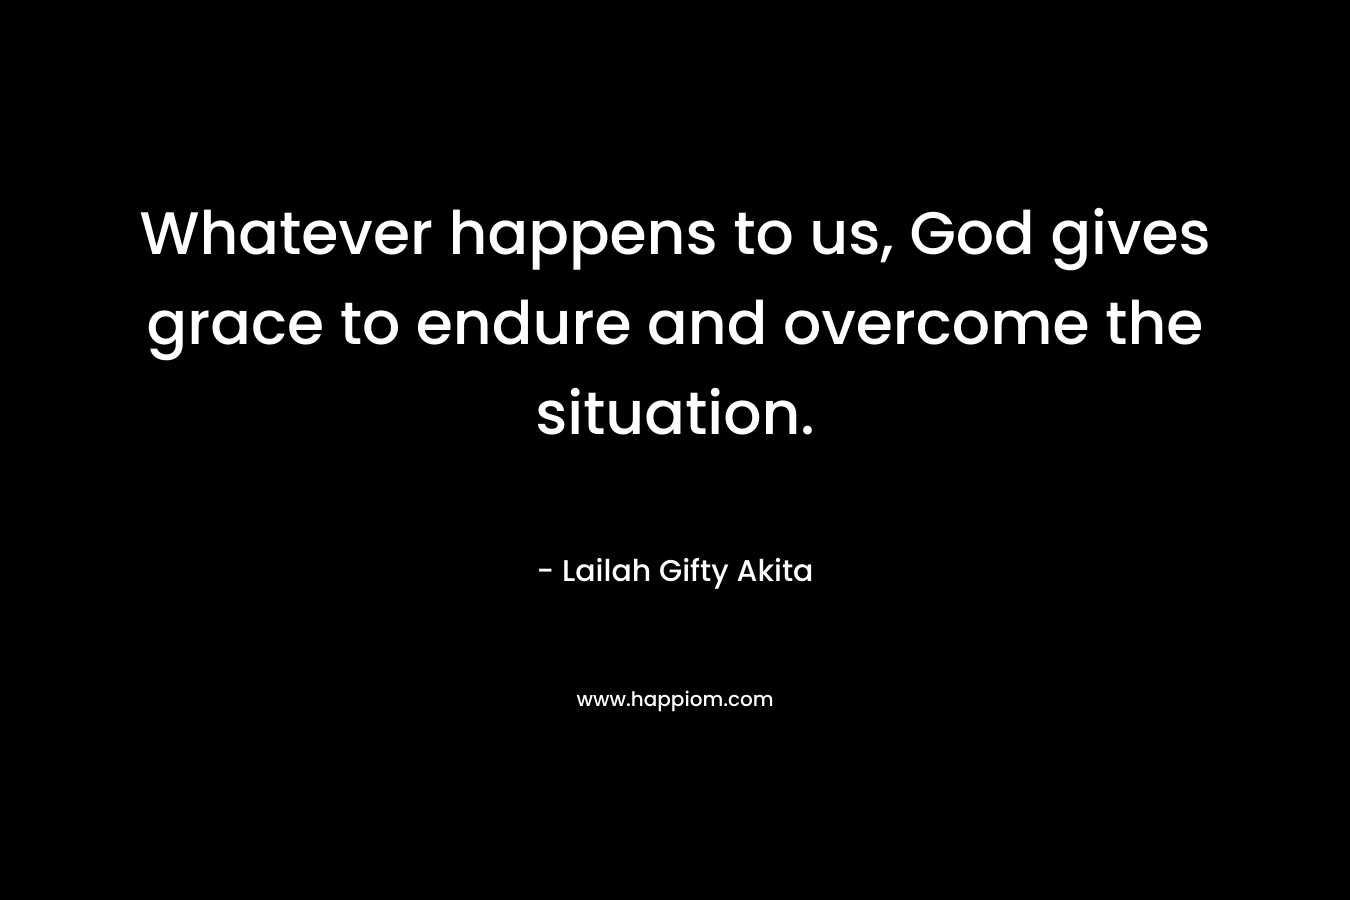 Whatever happens to us, God gives grace to endure and overcome the situation.